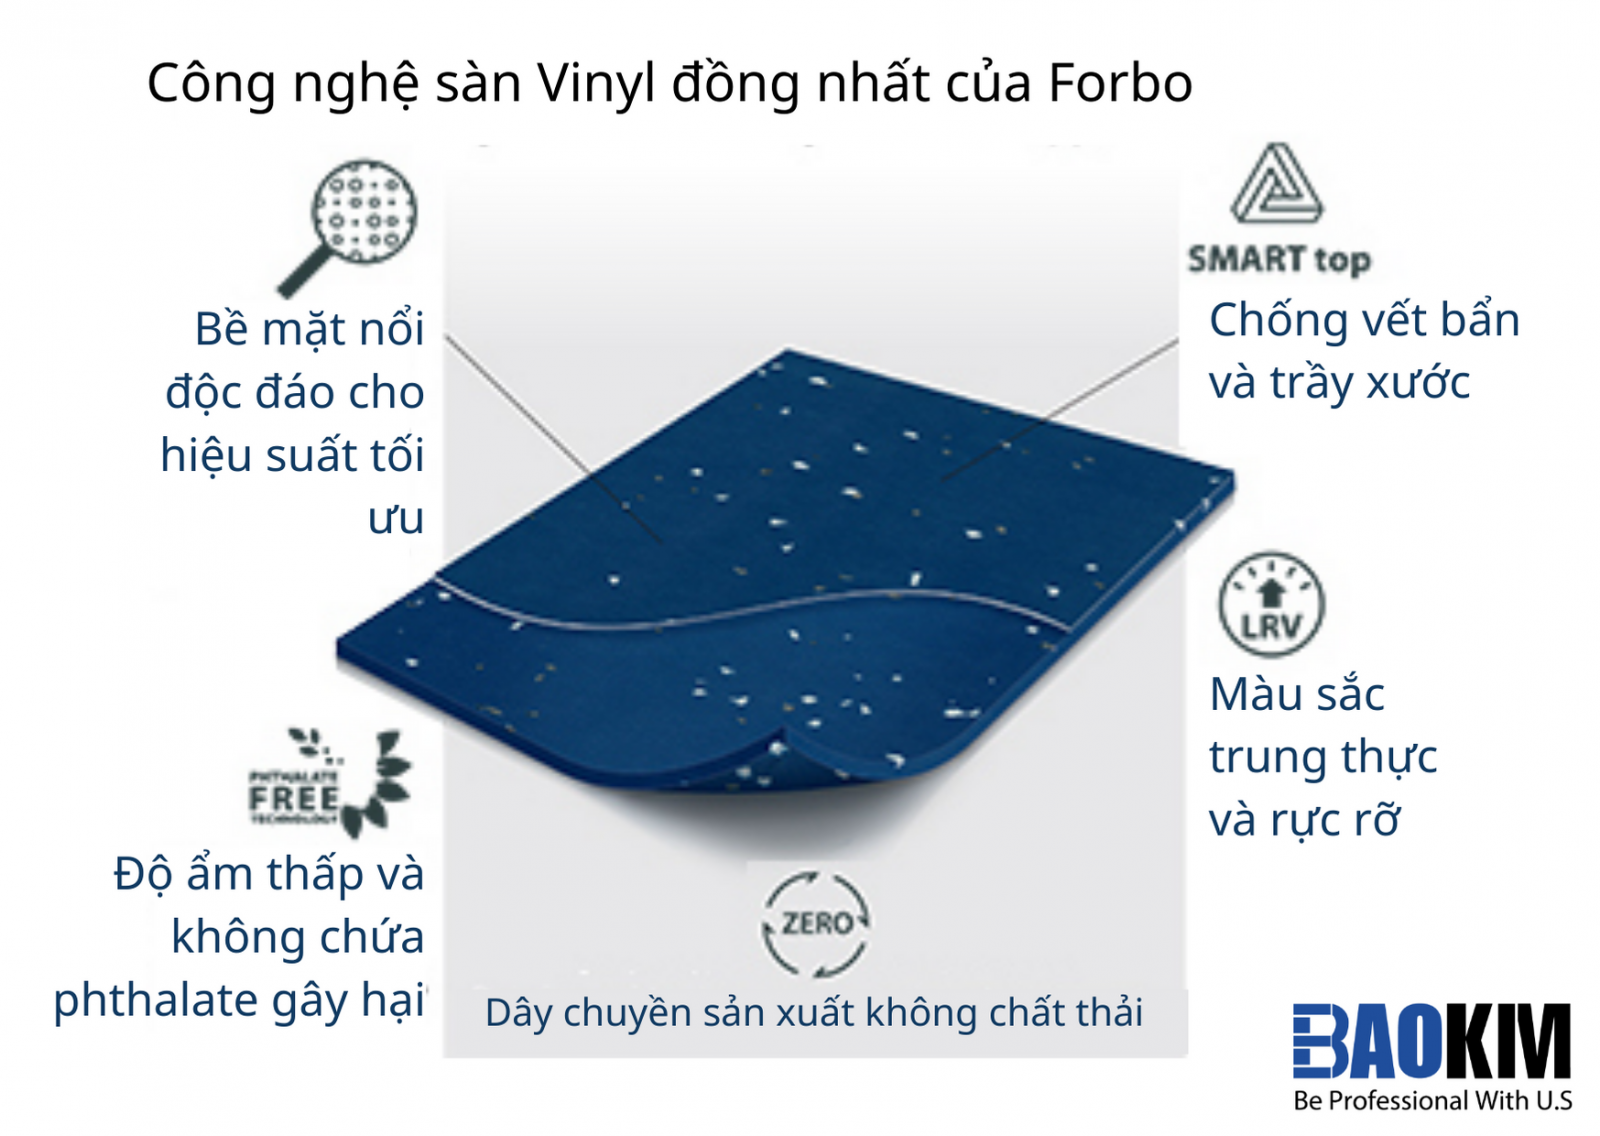 cong-nghe-san-vinyl-dong-nhat-cua-forbo